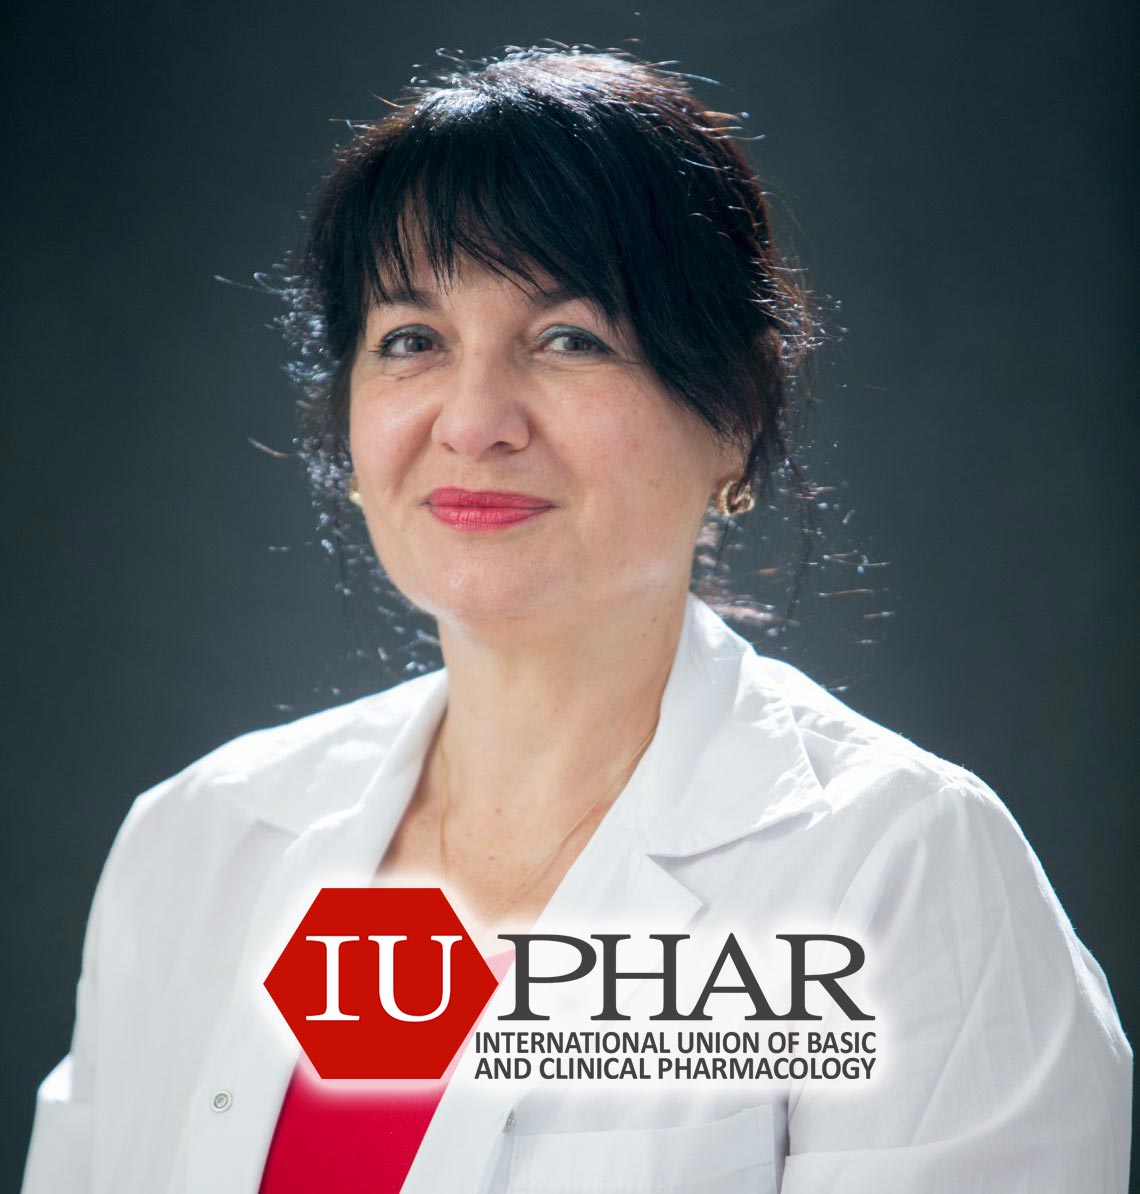 Hebrew U Prof first woman and first Israeli elected President of International Pharmacology Union